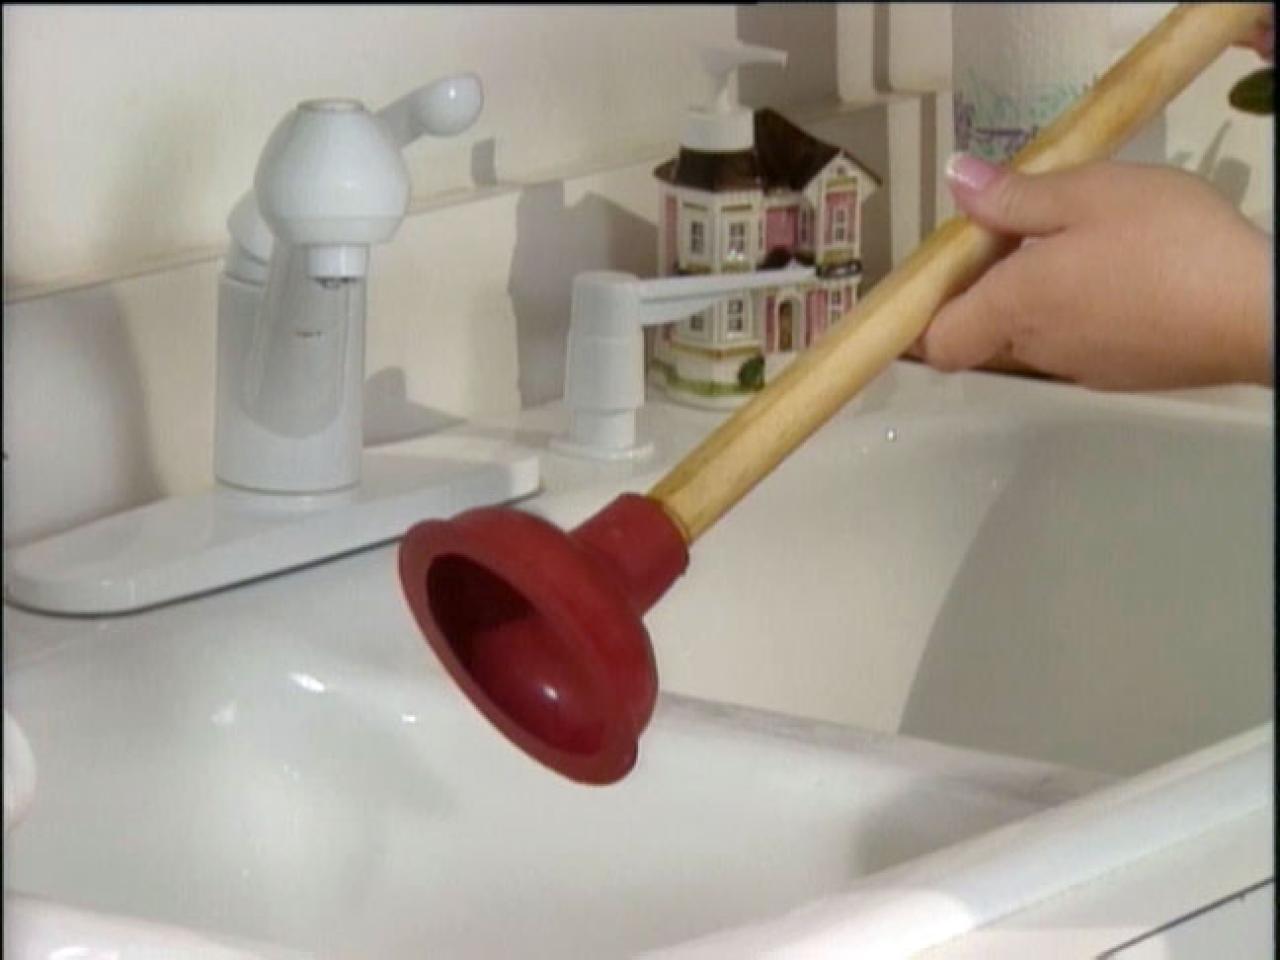 How To Unclog A Sink Drain Tos Diy, How To Unclog Bathtub Drain At Home